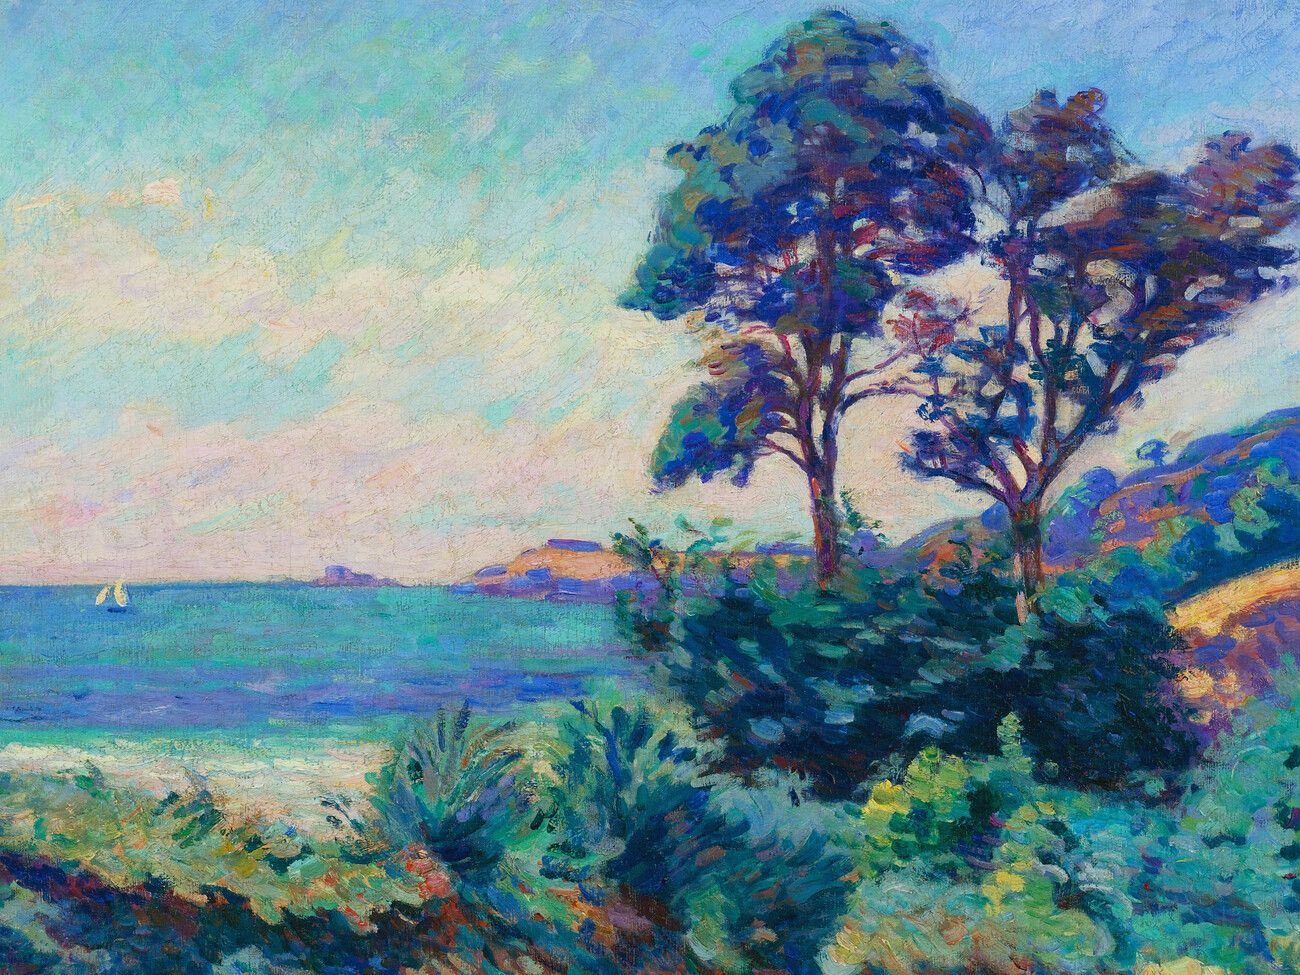 Wall Art Print | Marine À Saint Palais (tropical Landscape With A Boat On  The Water) – Armand Guillaumin | Europosters Intended For 2017 Tropical Landscape Wall Art (View 10 of 20)